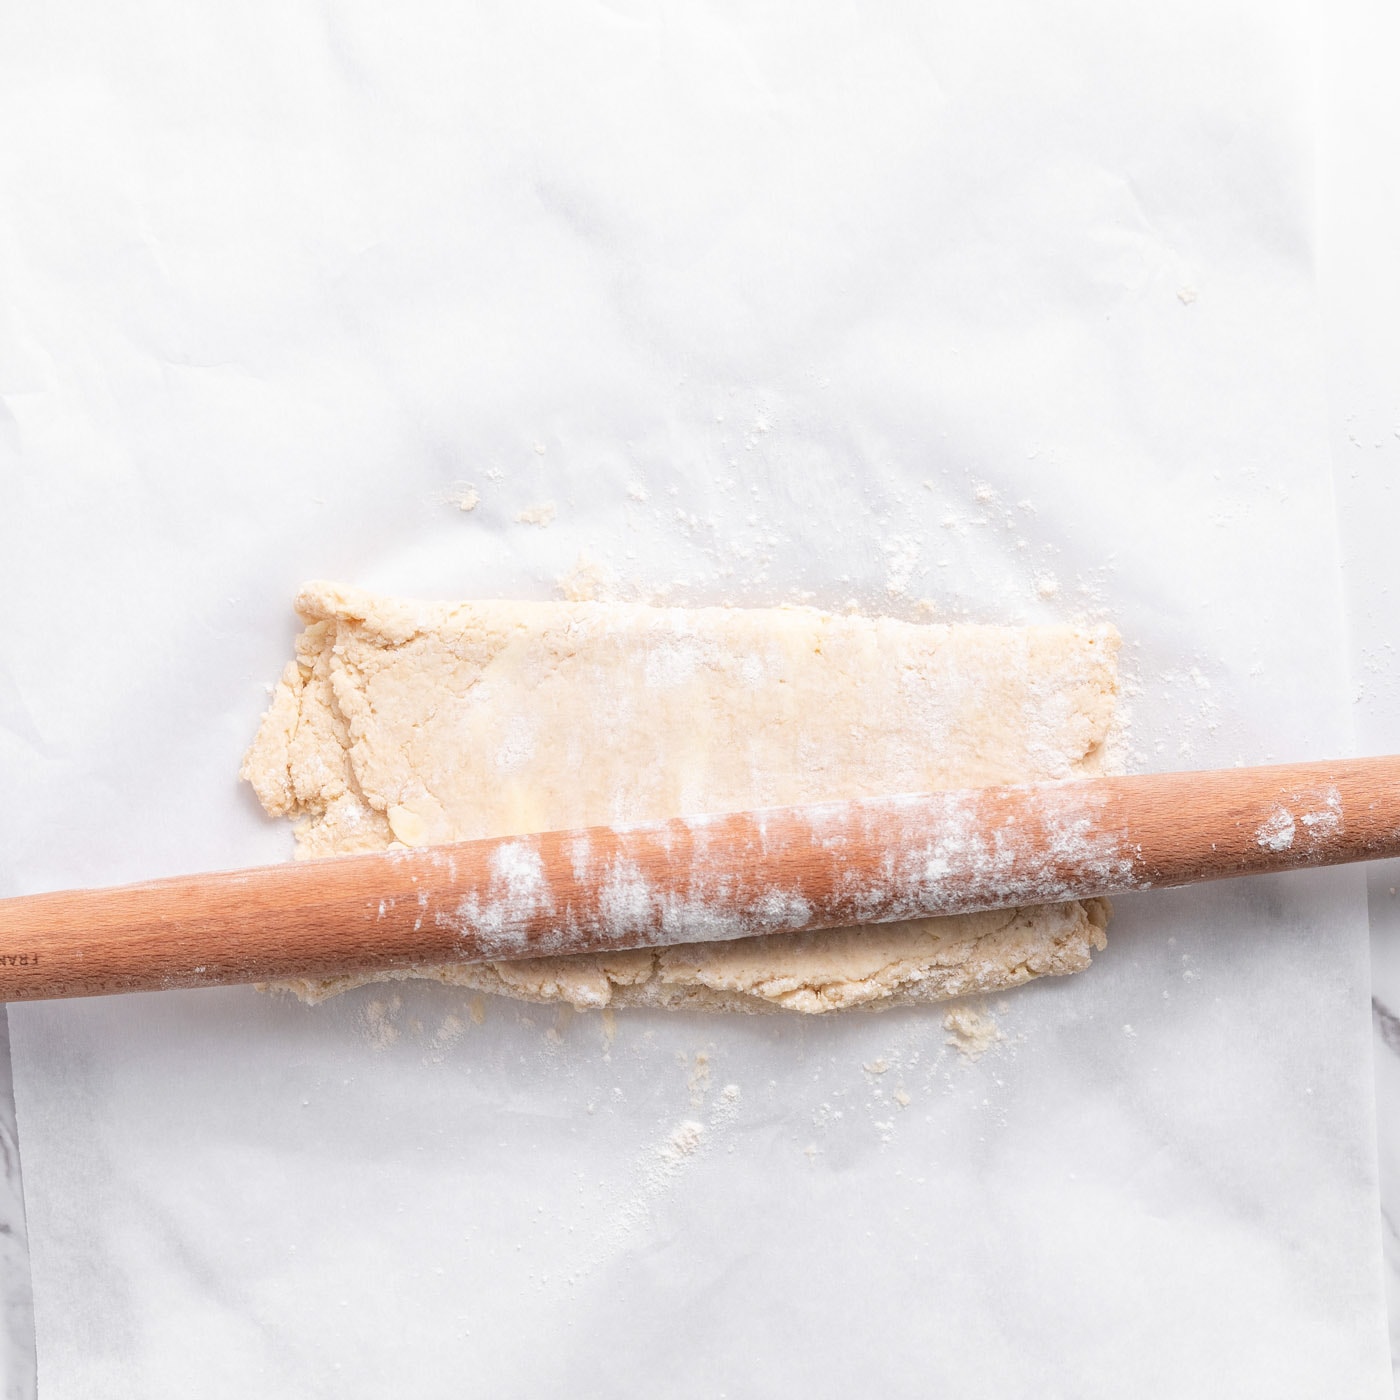 floured rolling pin pressing biscuit dough